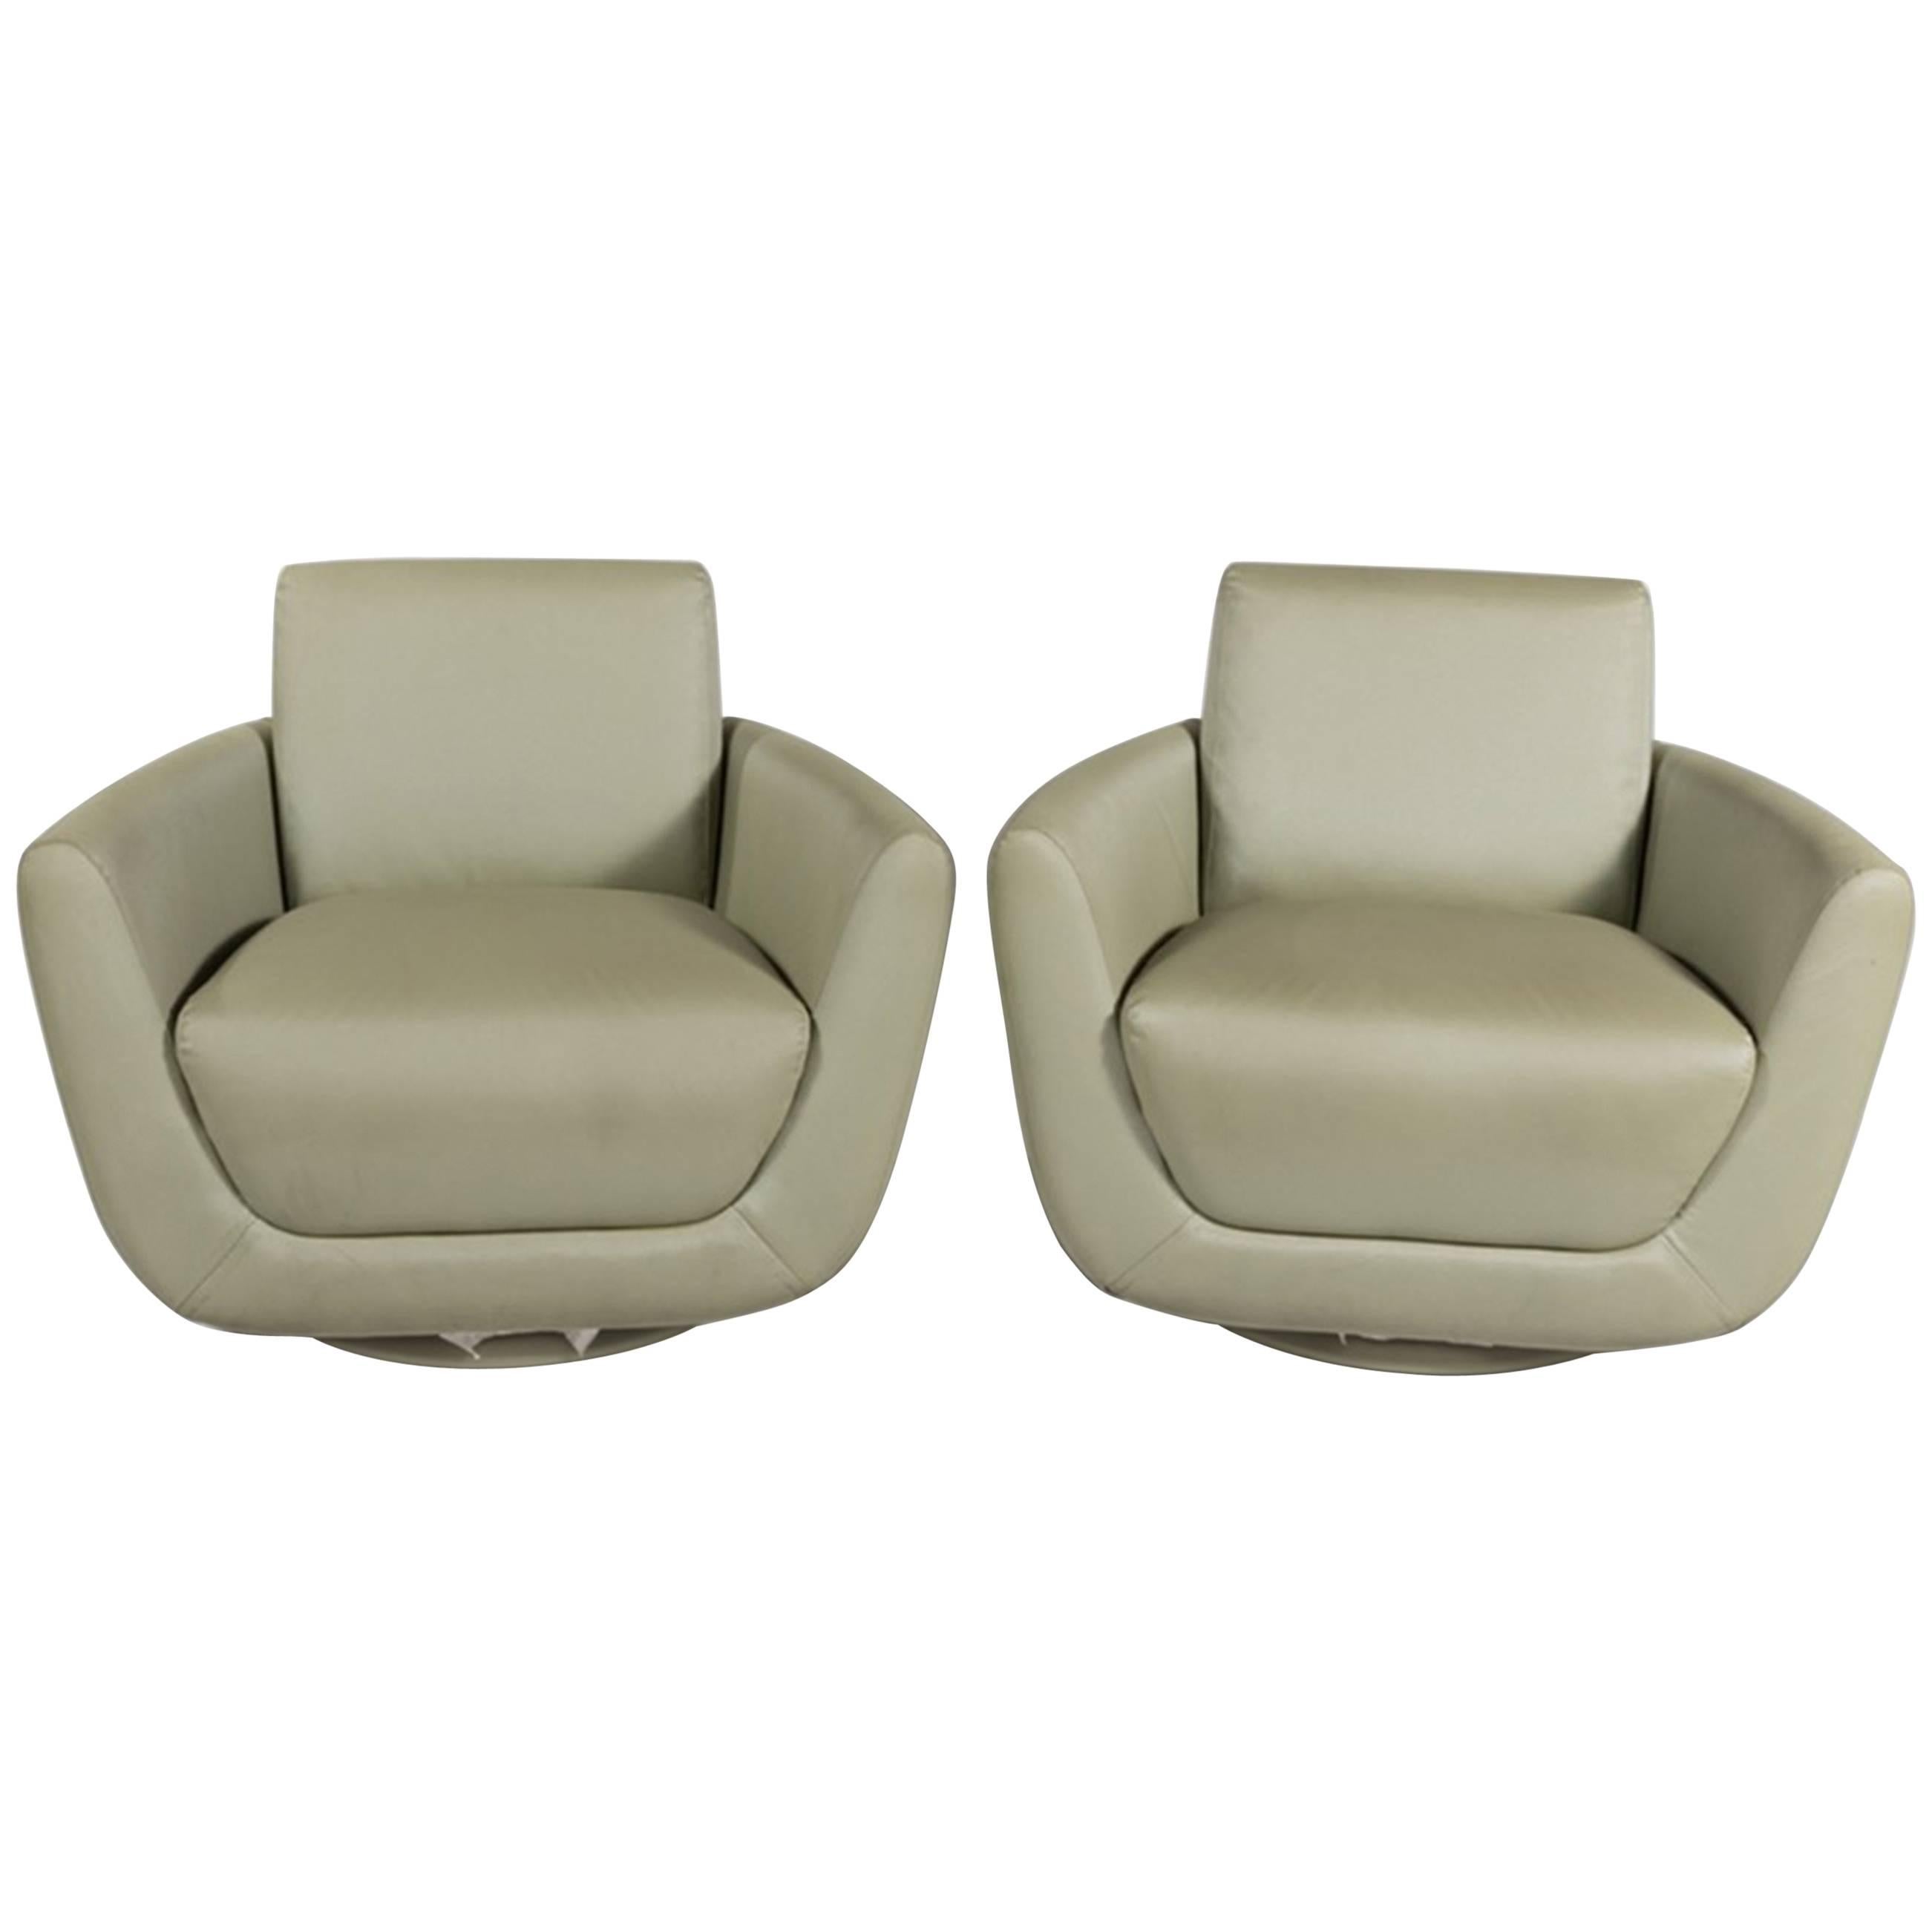 Chic Pair of Mid-Century Celery Green Swivel Chairs For Sale